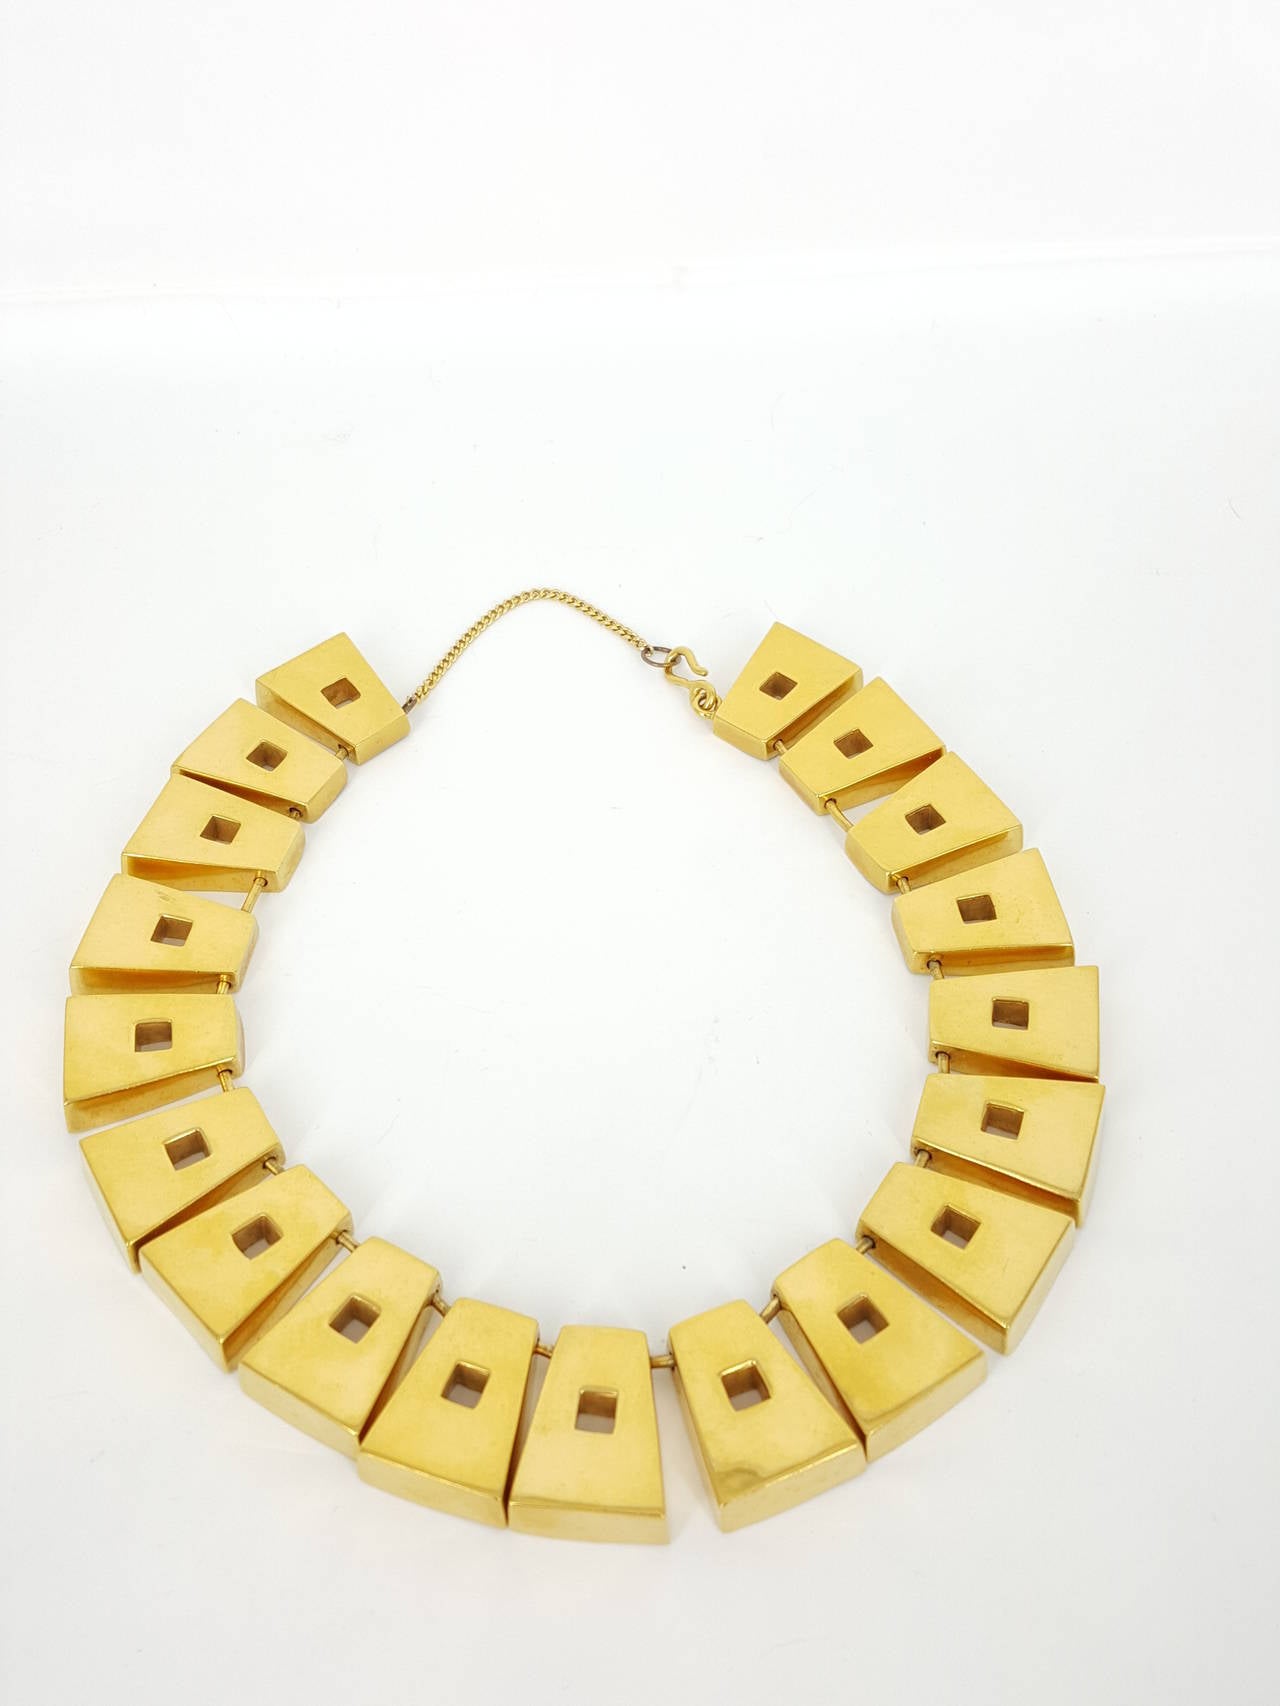 Offered for sale is this early geometric choker necklace signed by Steven Voubel cica 1980's.  This bold design is done is sterling silver Vermeil and is a fabulous look.
Voubel's designs are available still today, but nothing with the flair of